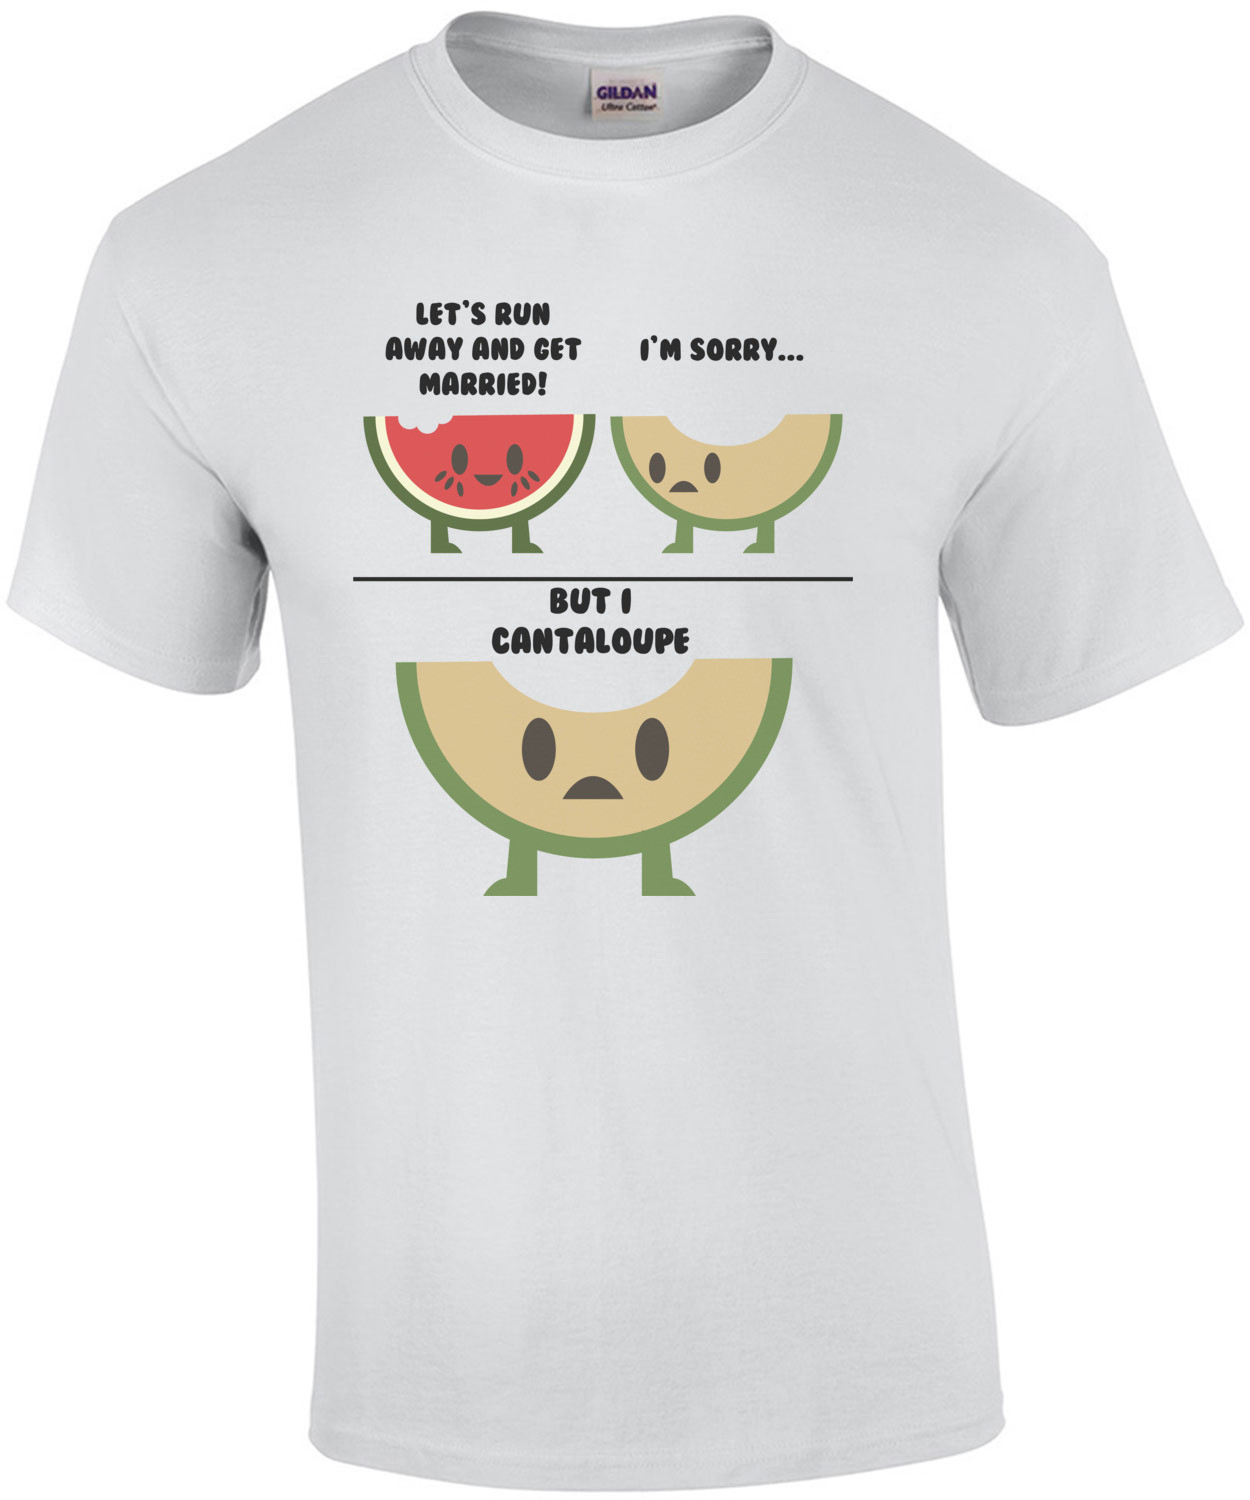 Let's Run Away And Get Married! I'm Sorry but I cantaloupe. Pun T-Shirt